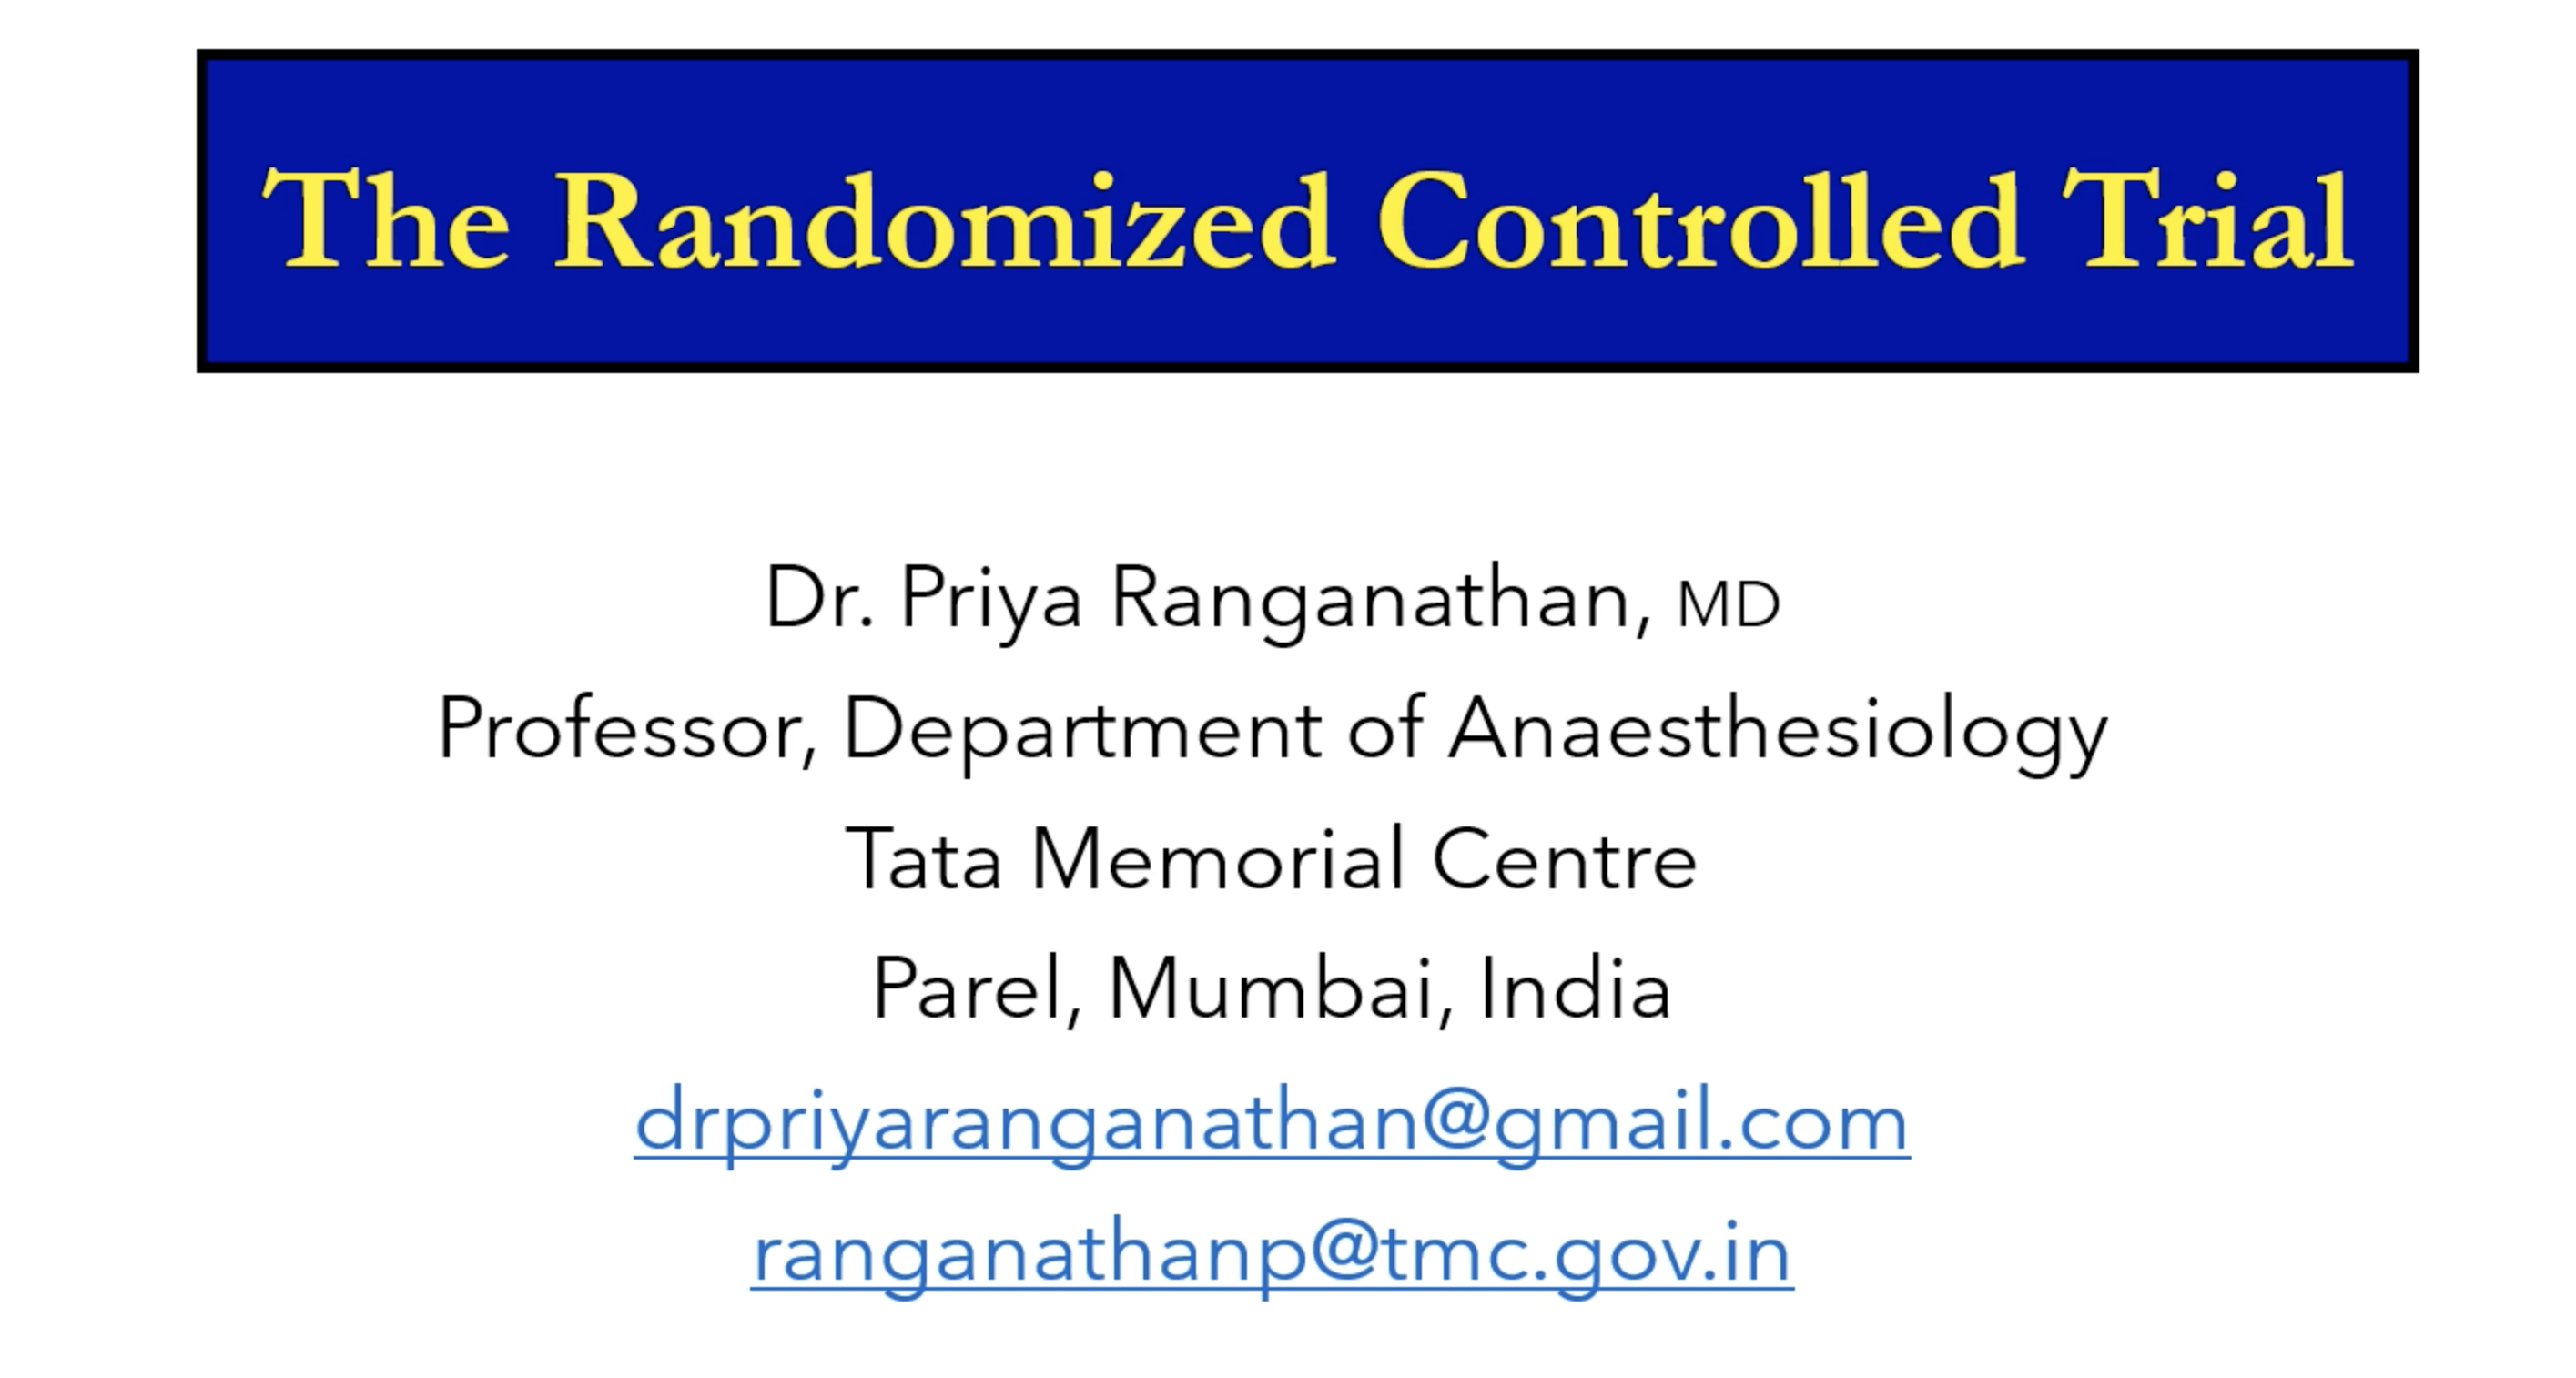 The Randomized Controlled Trial